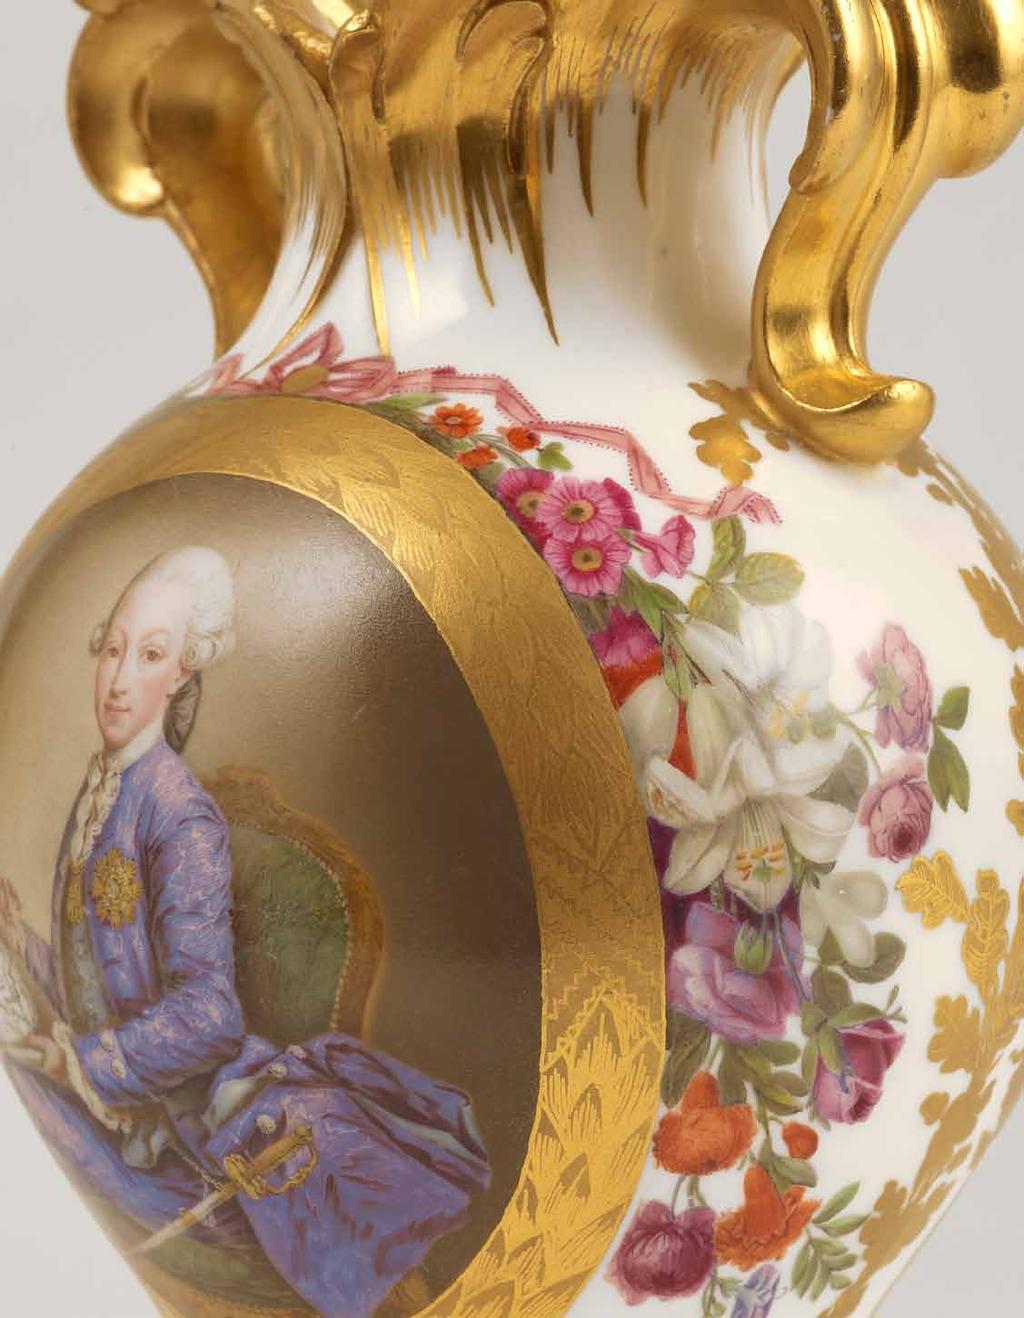 This is a selection of 18th Century Vincennes and Sèvres Porcelain to be displayed for sale at Art Antiques London Art Antiques London Stand E8 Albert Memorial West Lawn Kensington Gardens London